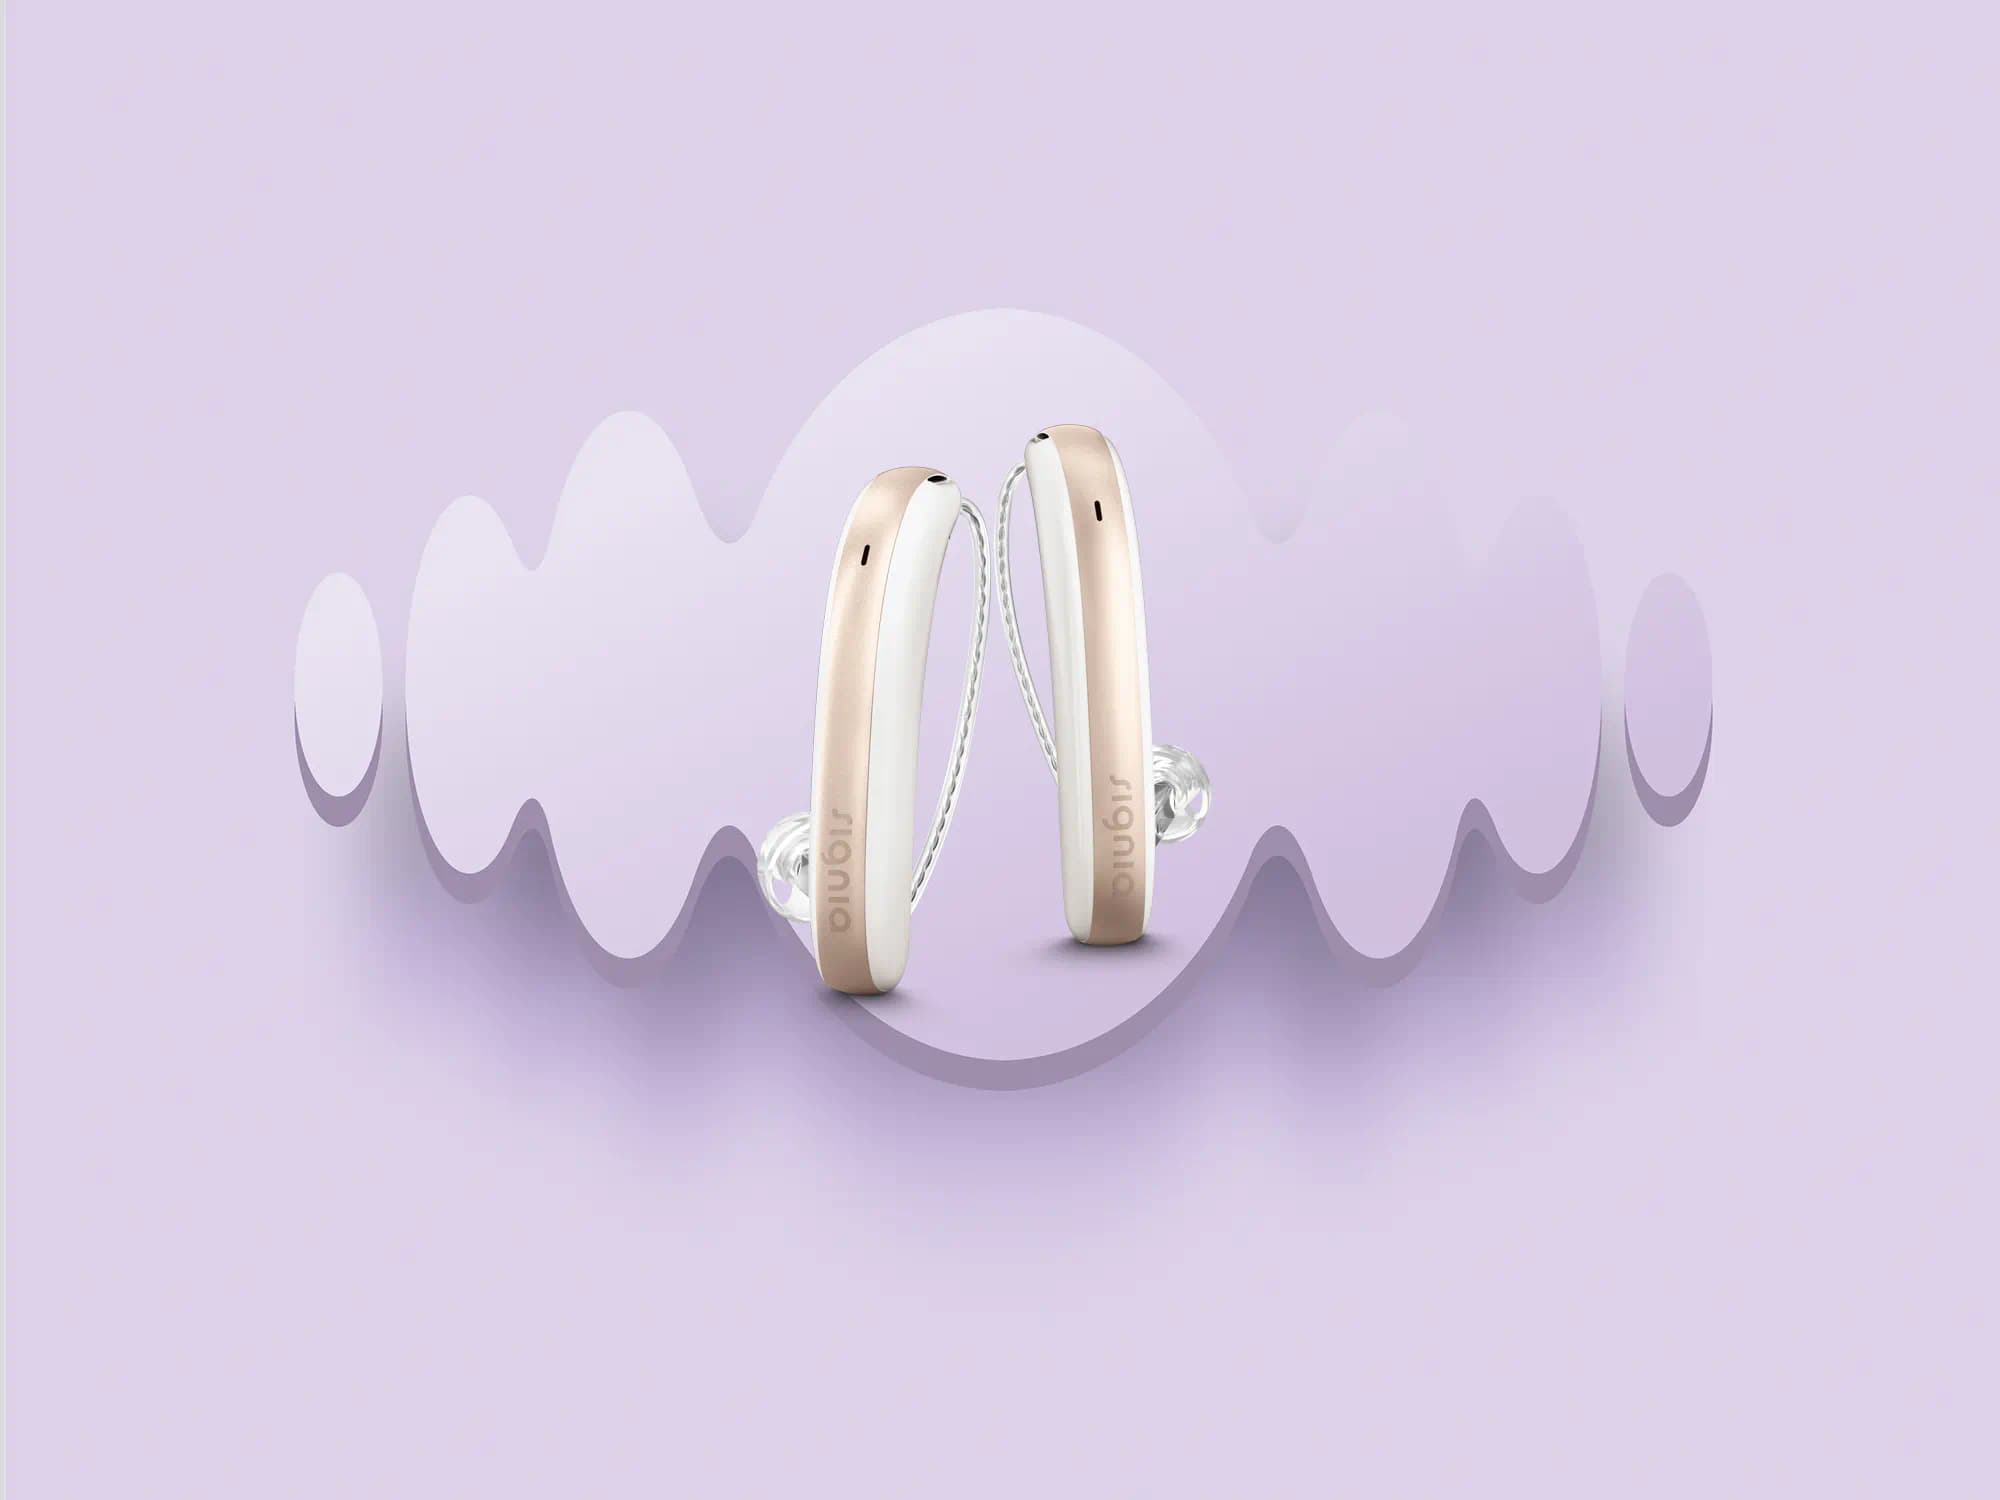 Signia Styletto AX hearing aids are slim and small and sitting discreately behind your ear